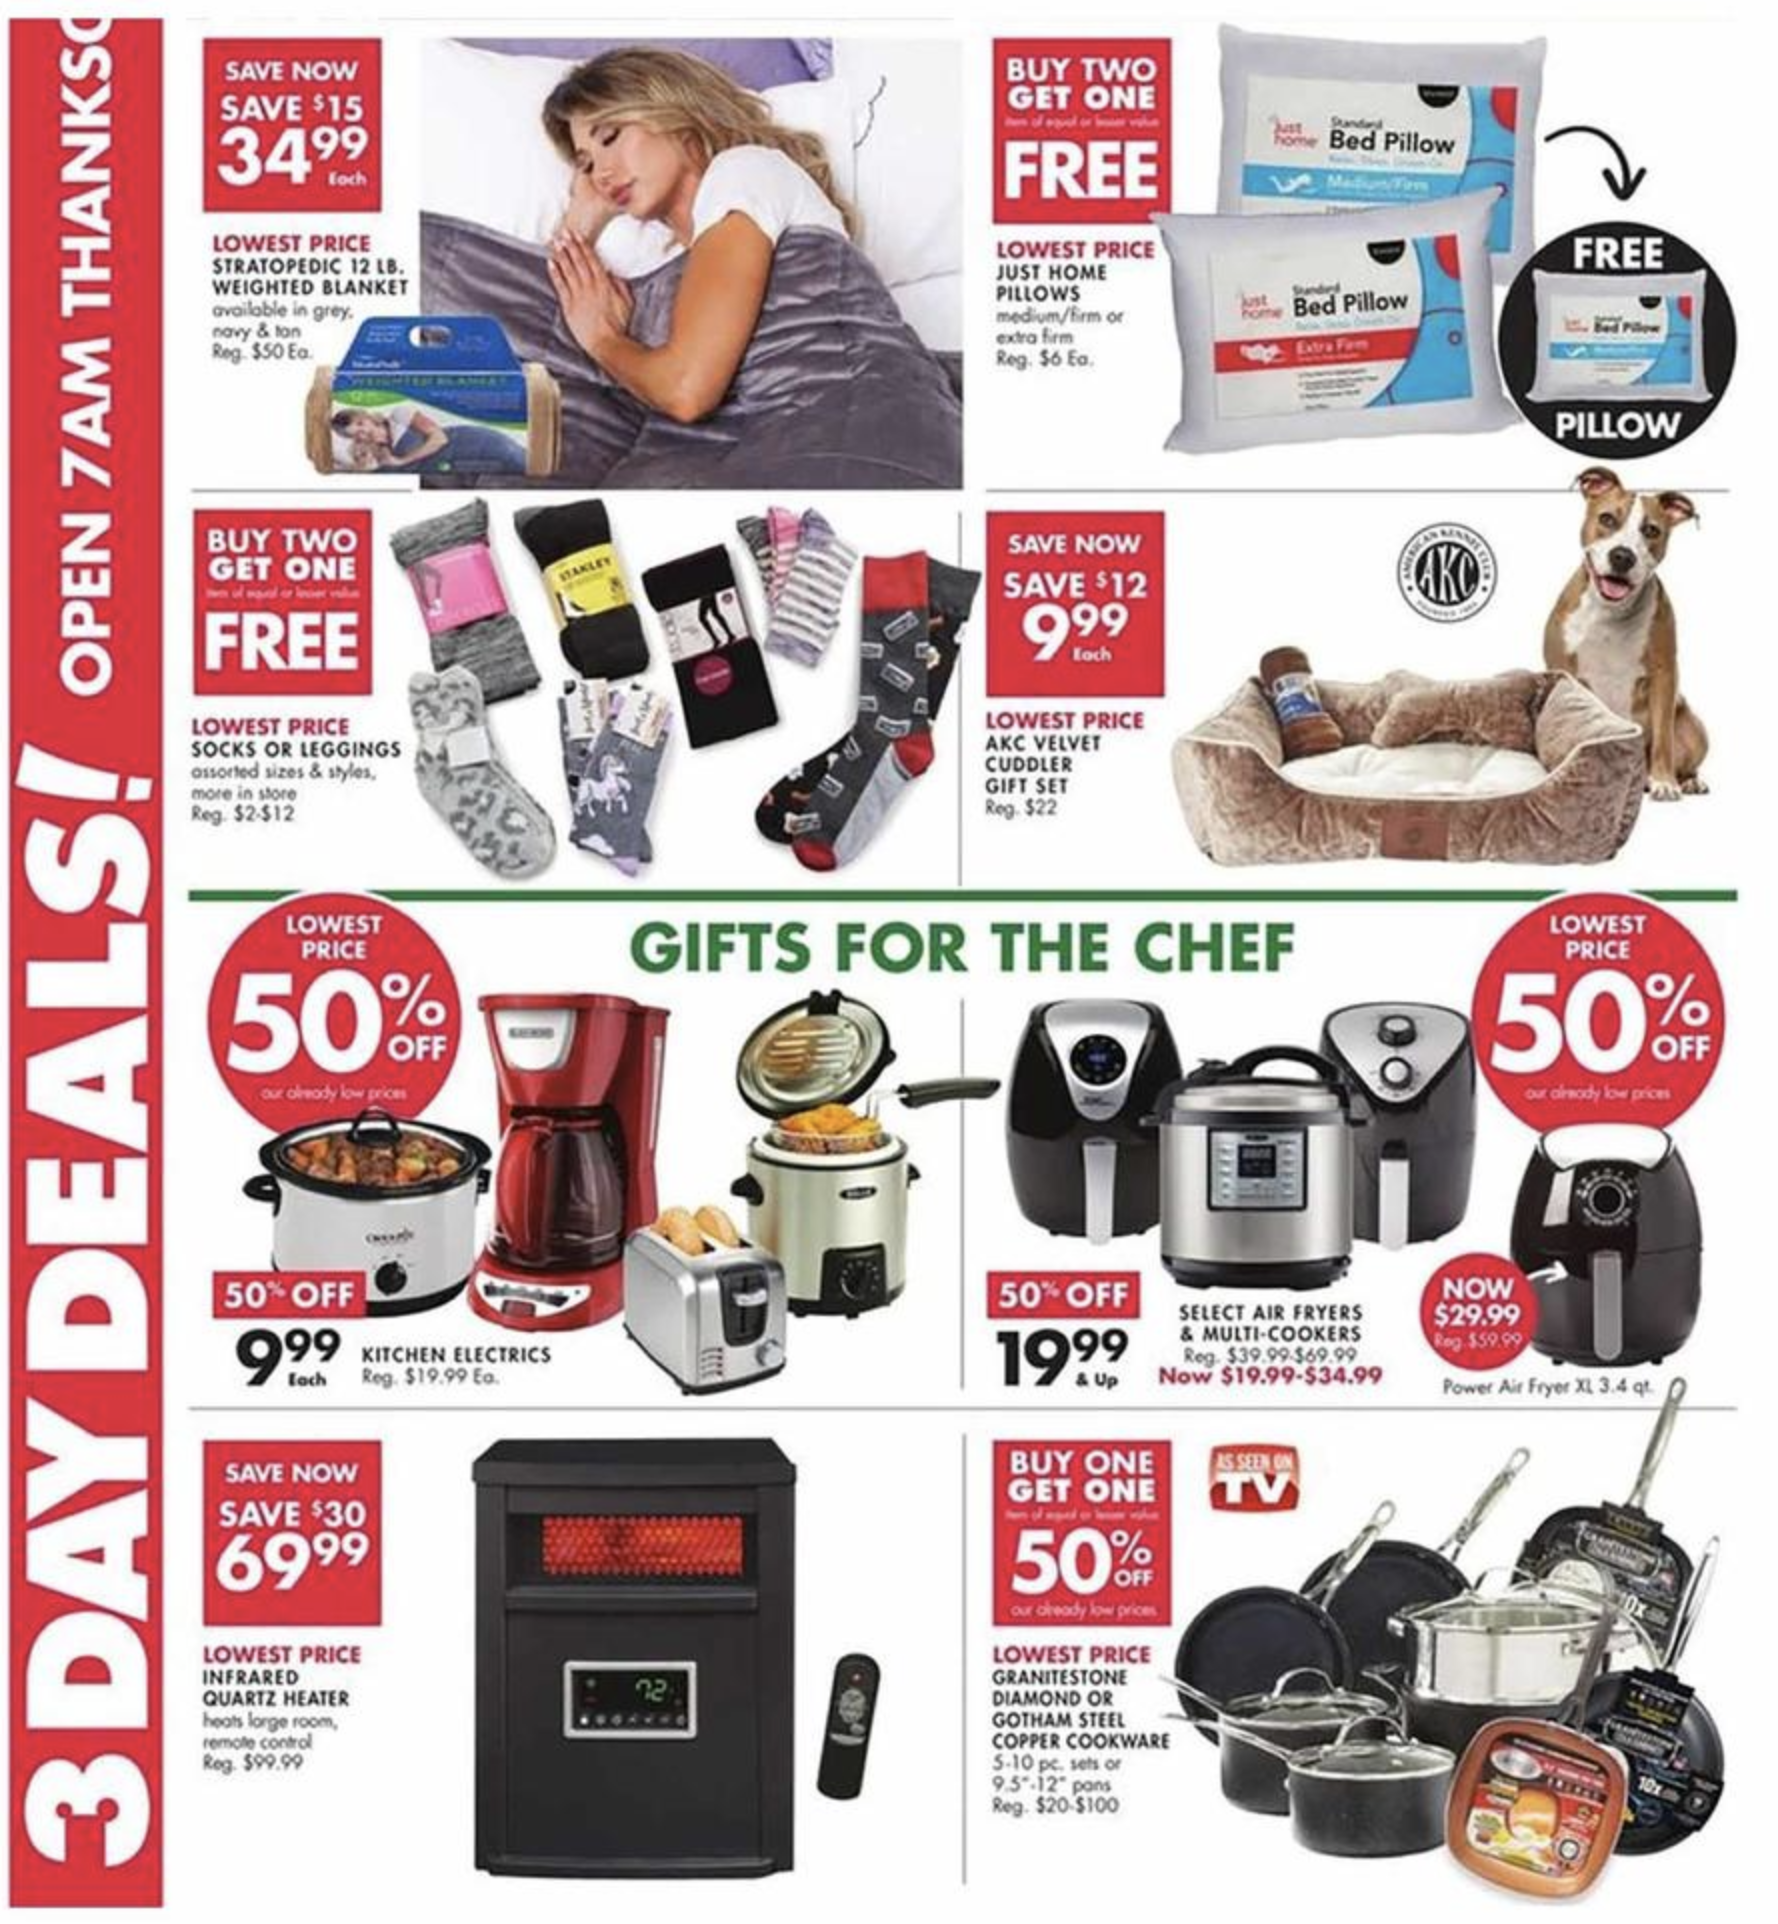 Big Lots Black Friday Ad Reveals Store Hours